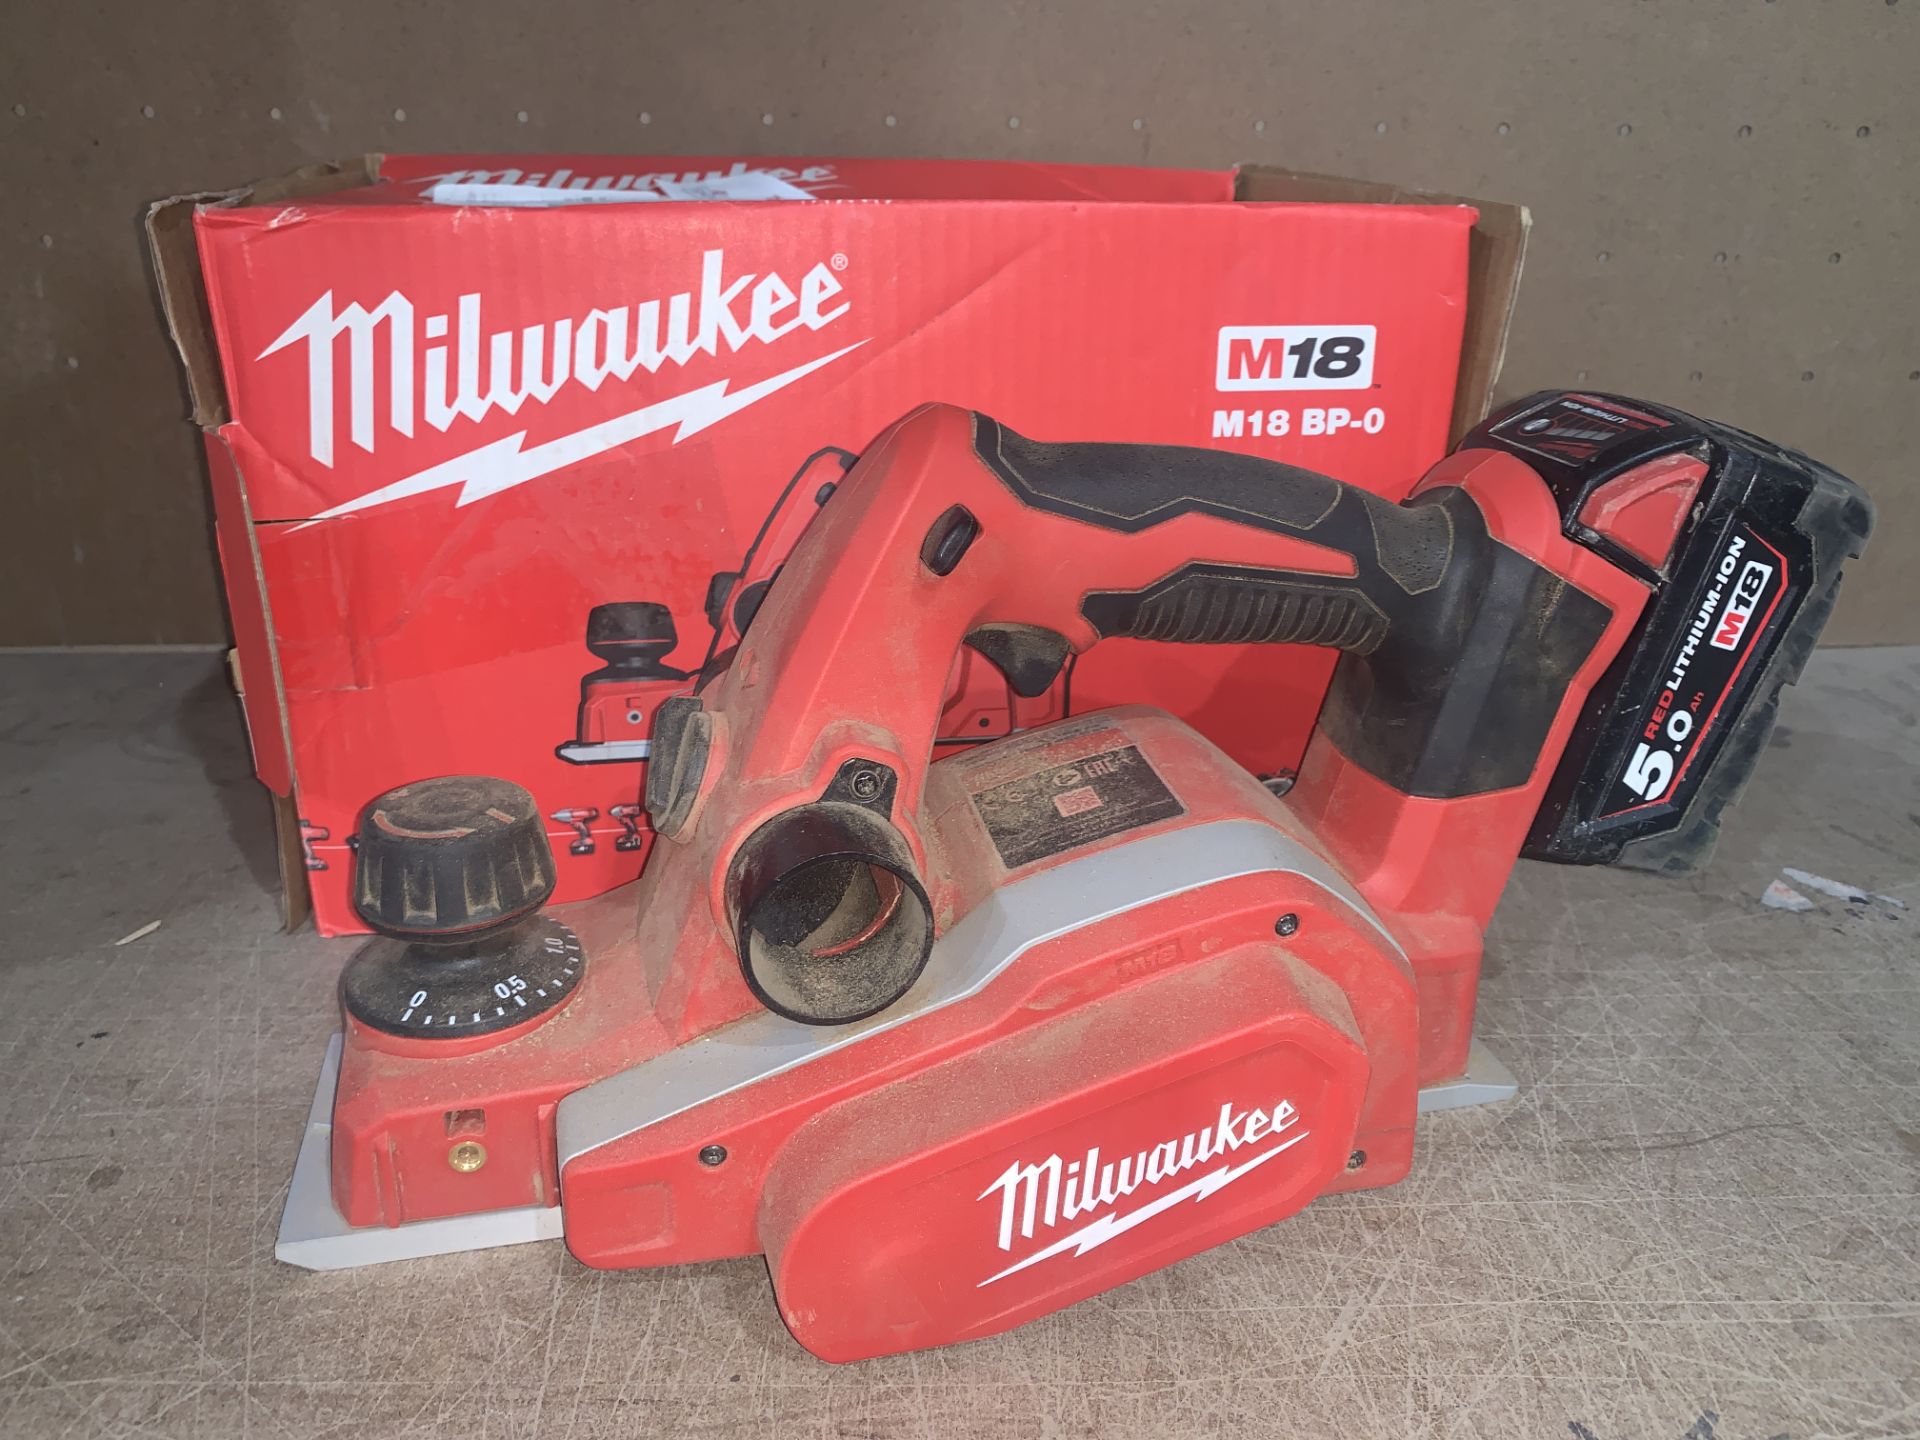 MILWAUKEE M18 BP-0 18V LI-ION CORDLESS PLANER COMES WITH BOX (UNCHECKED, UNTESTED)